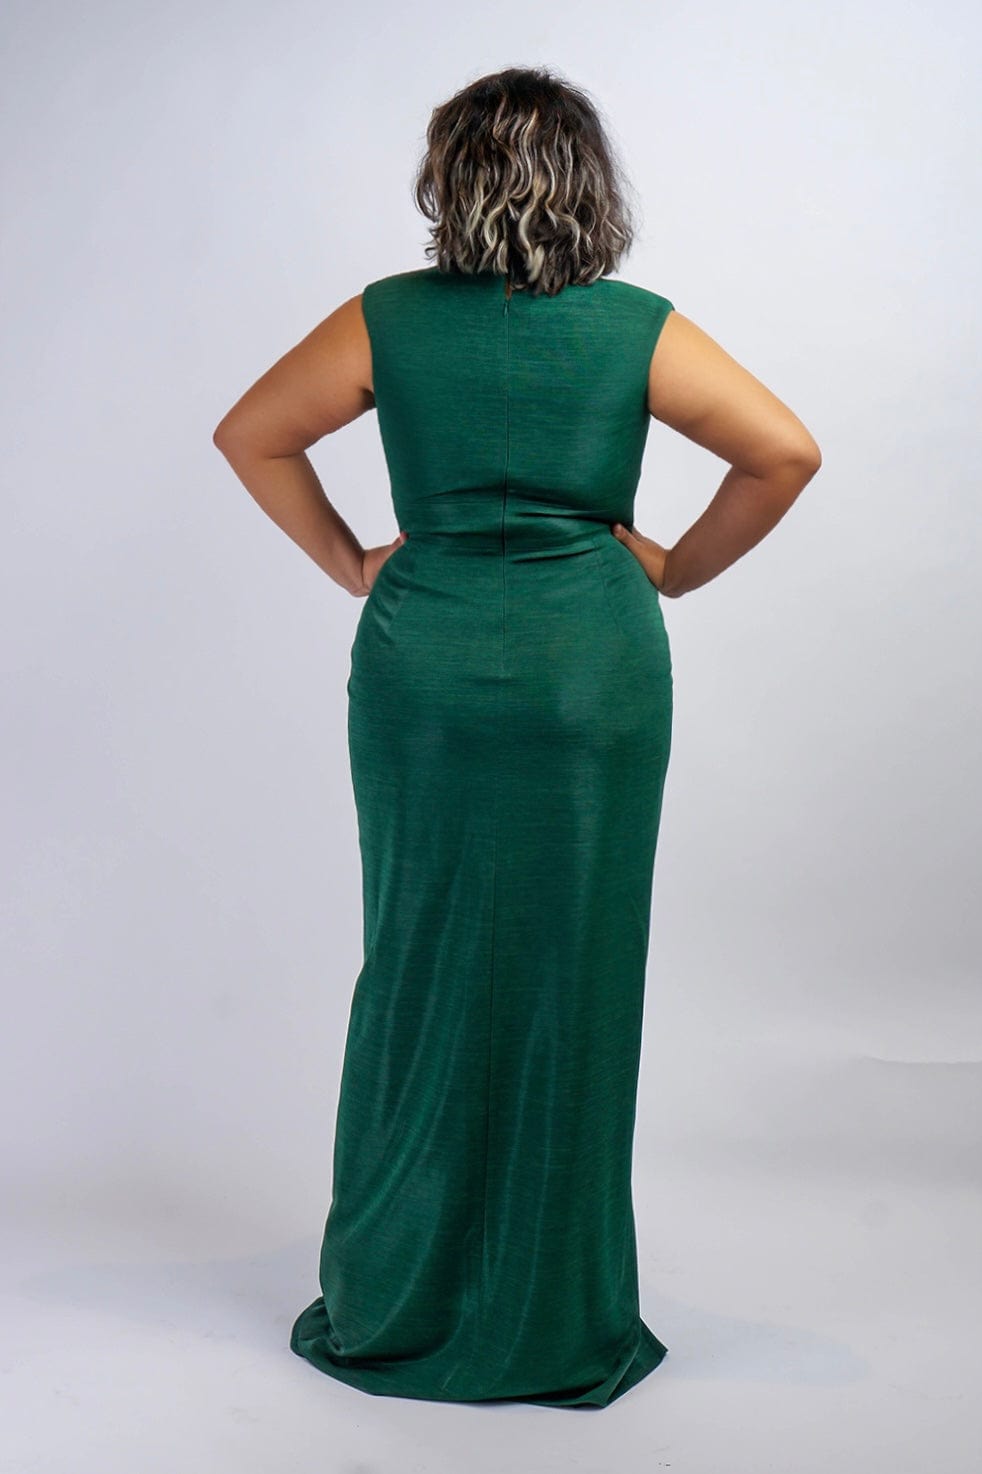 Chloe Dao GOWNS Emerald Green Luxe V Neck Aiden Gown